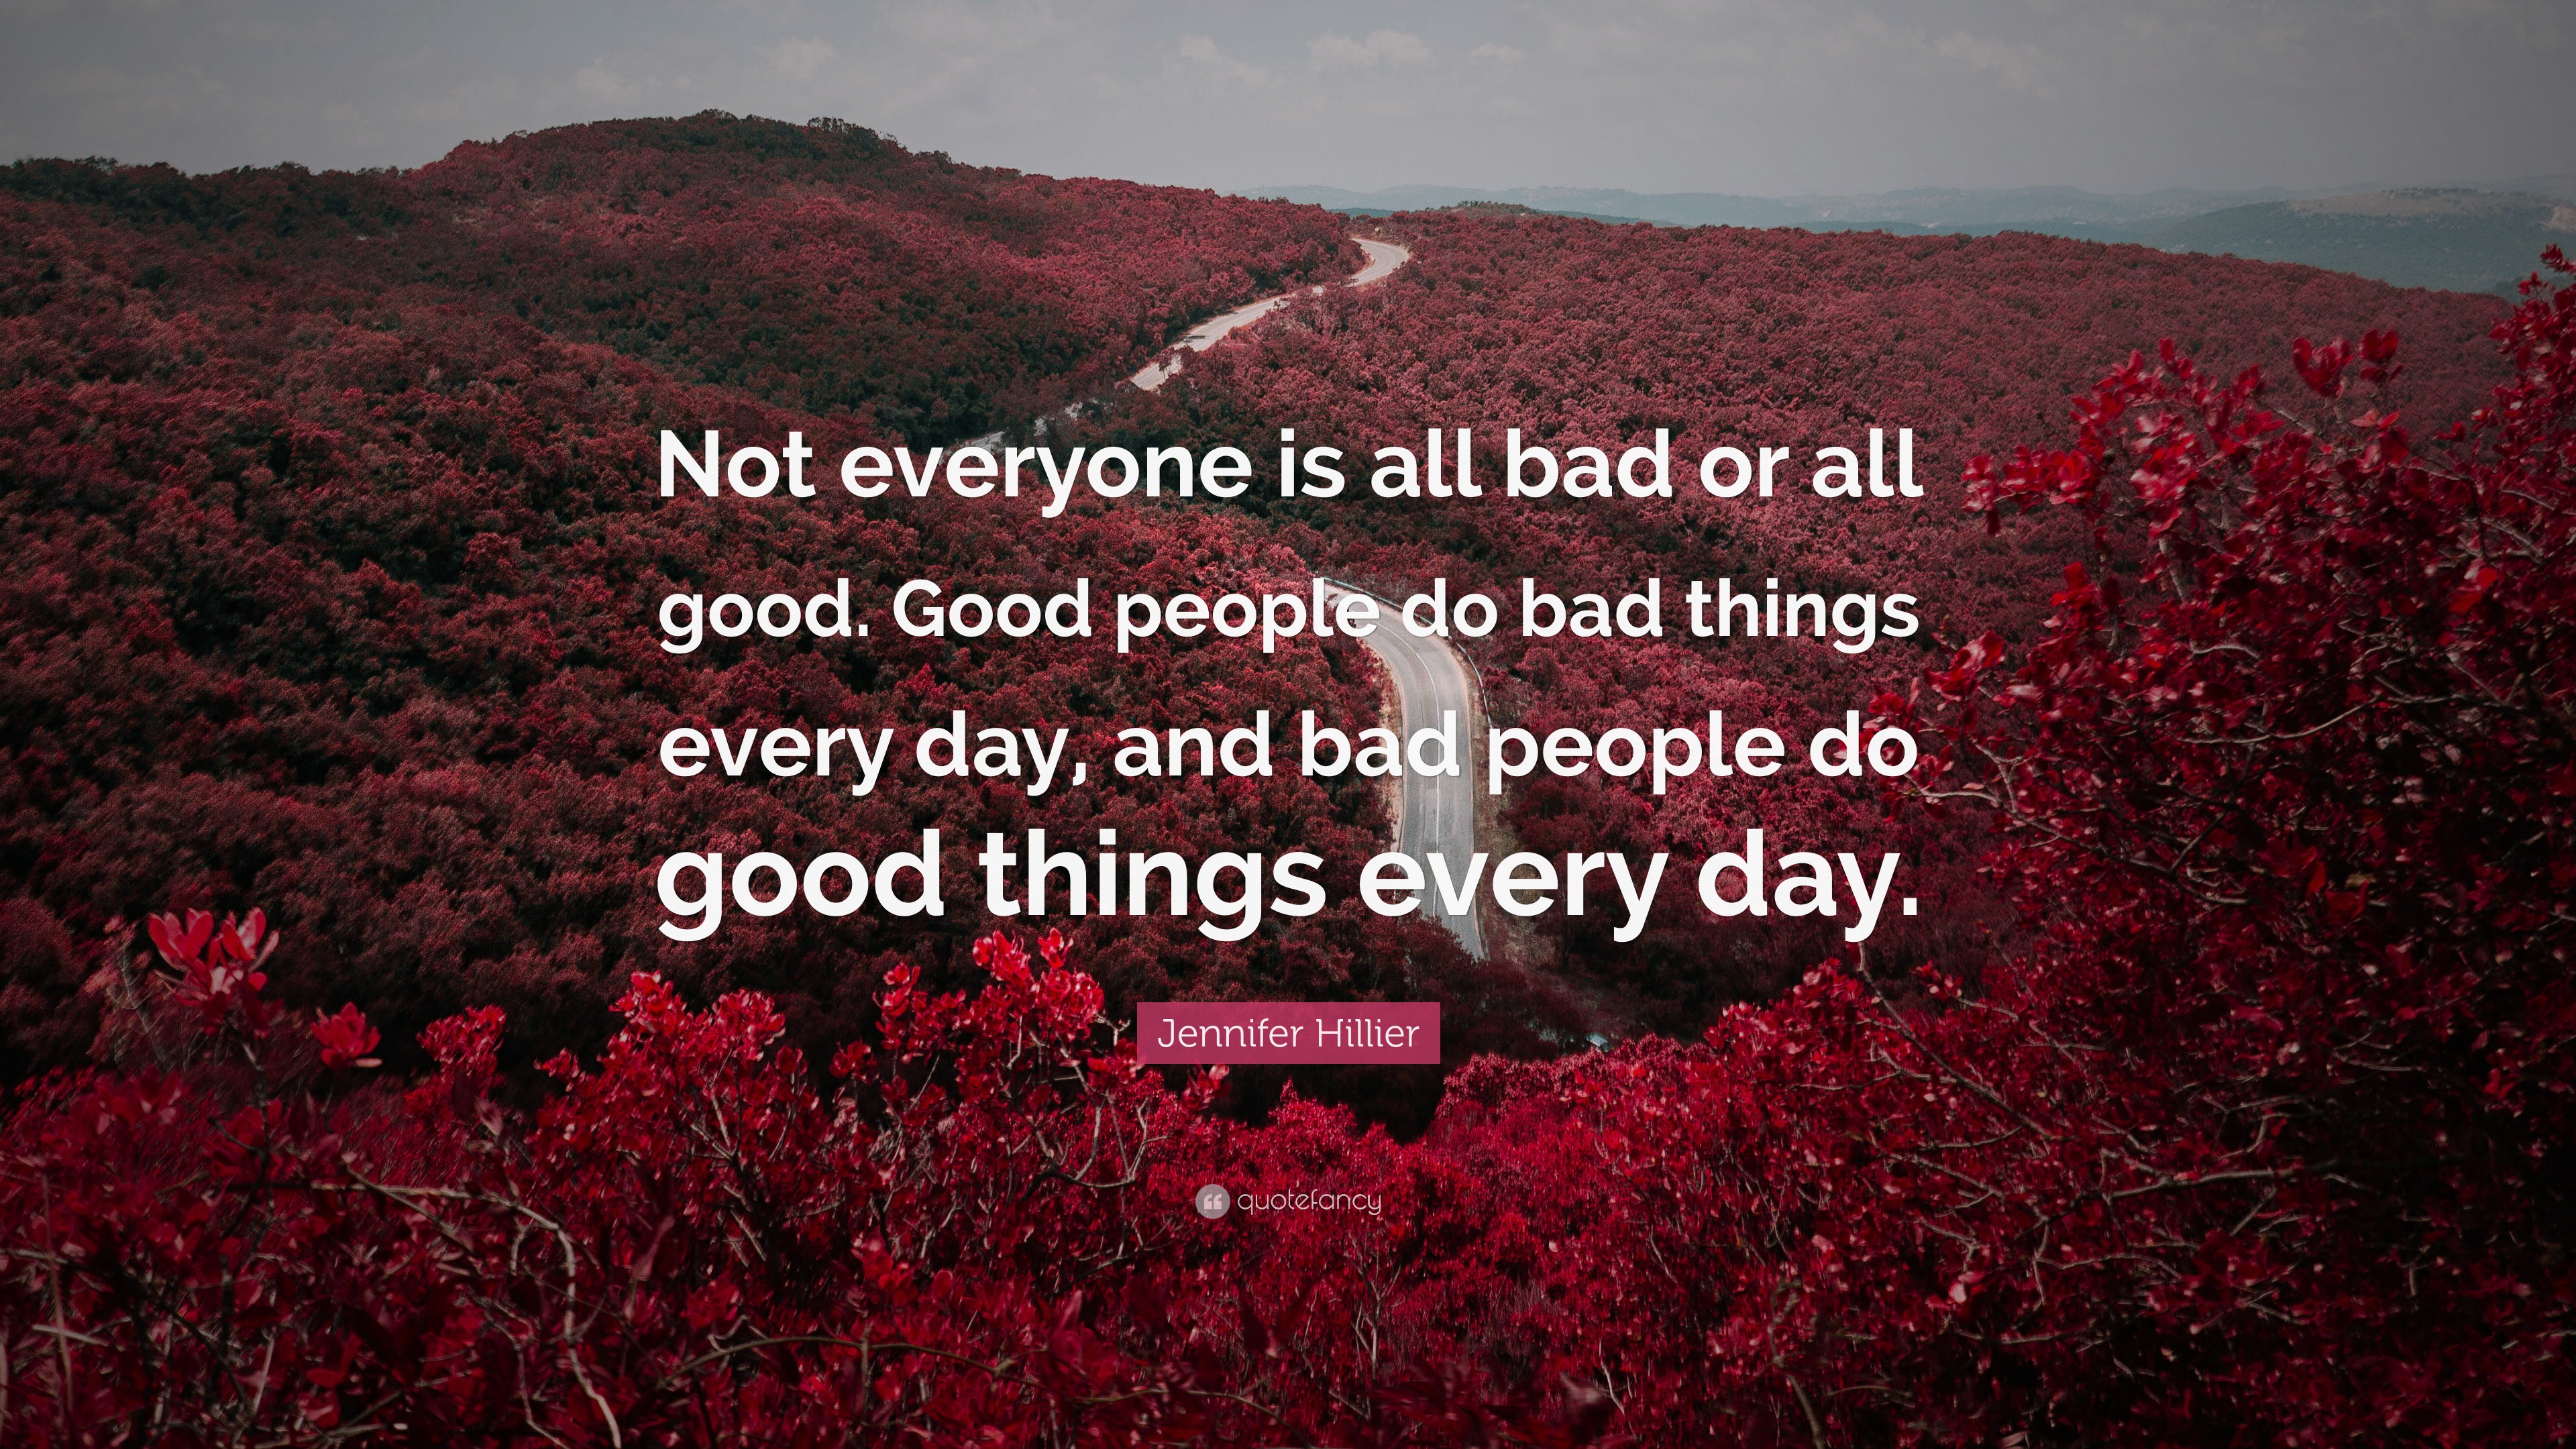 Jennifer Hillier Quote: “Not everyone is all bad or all good. Good people  do bad things